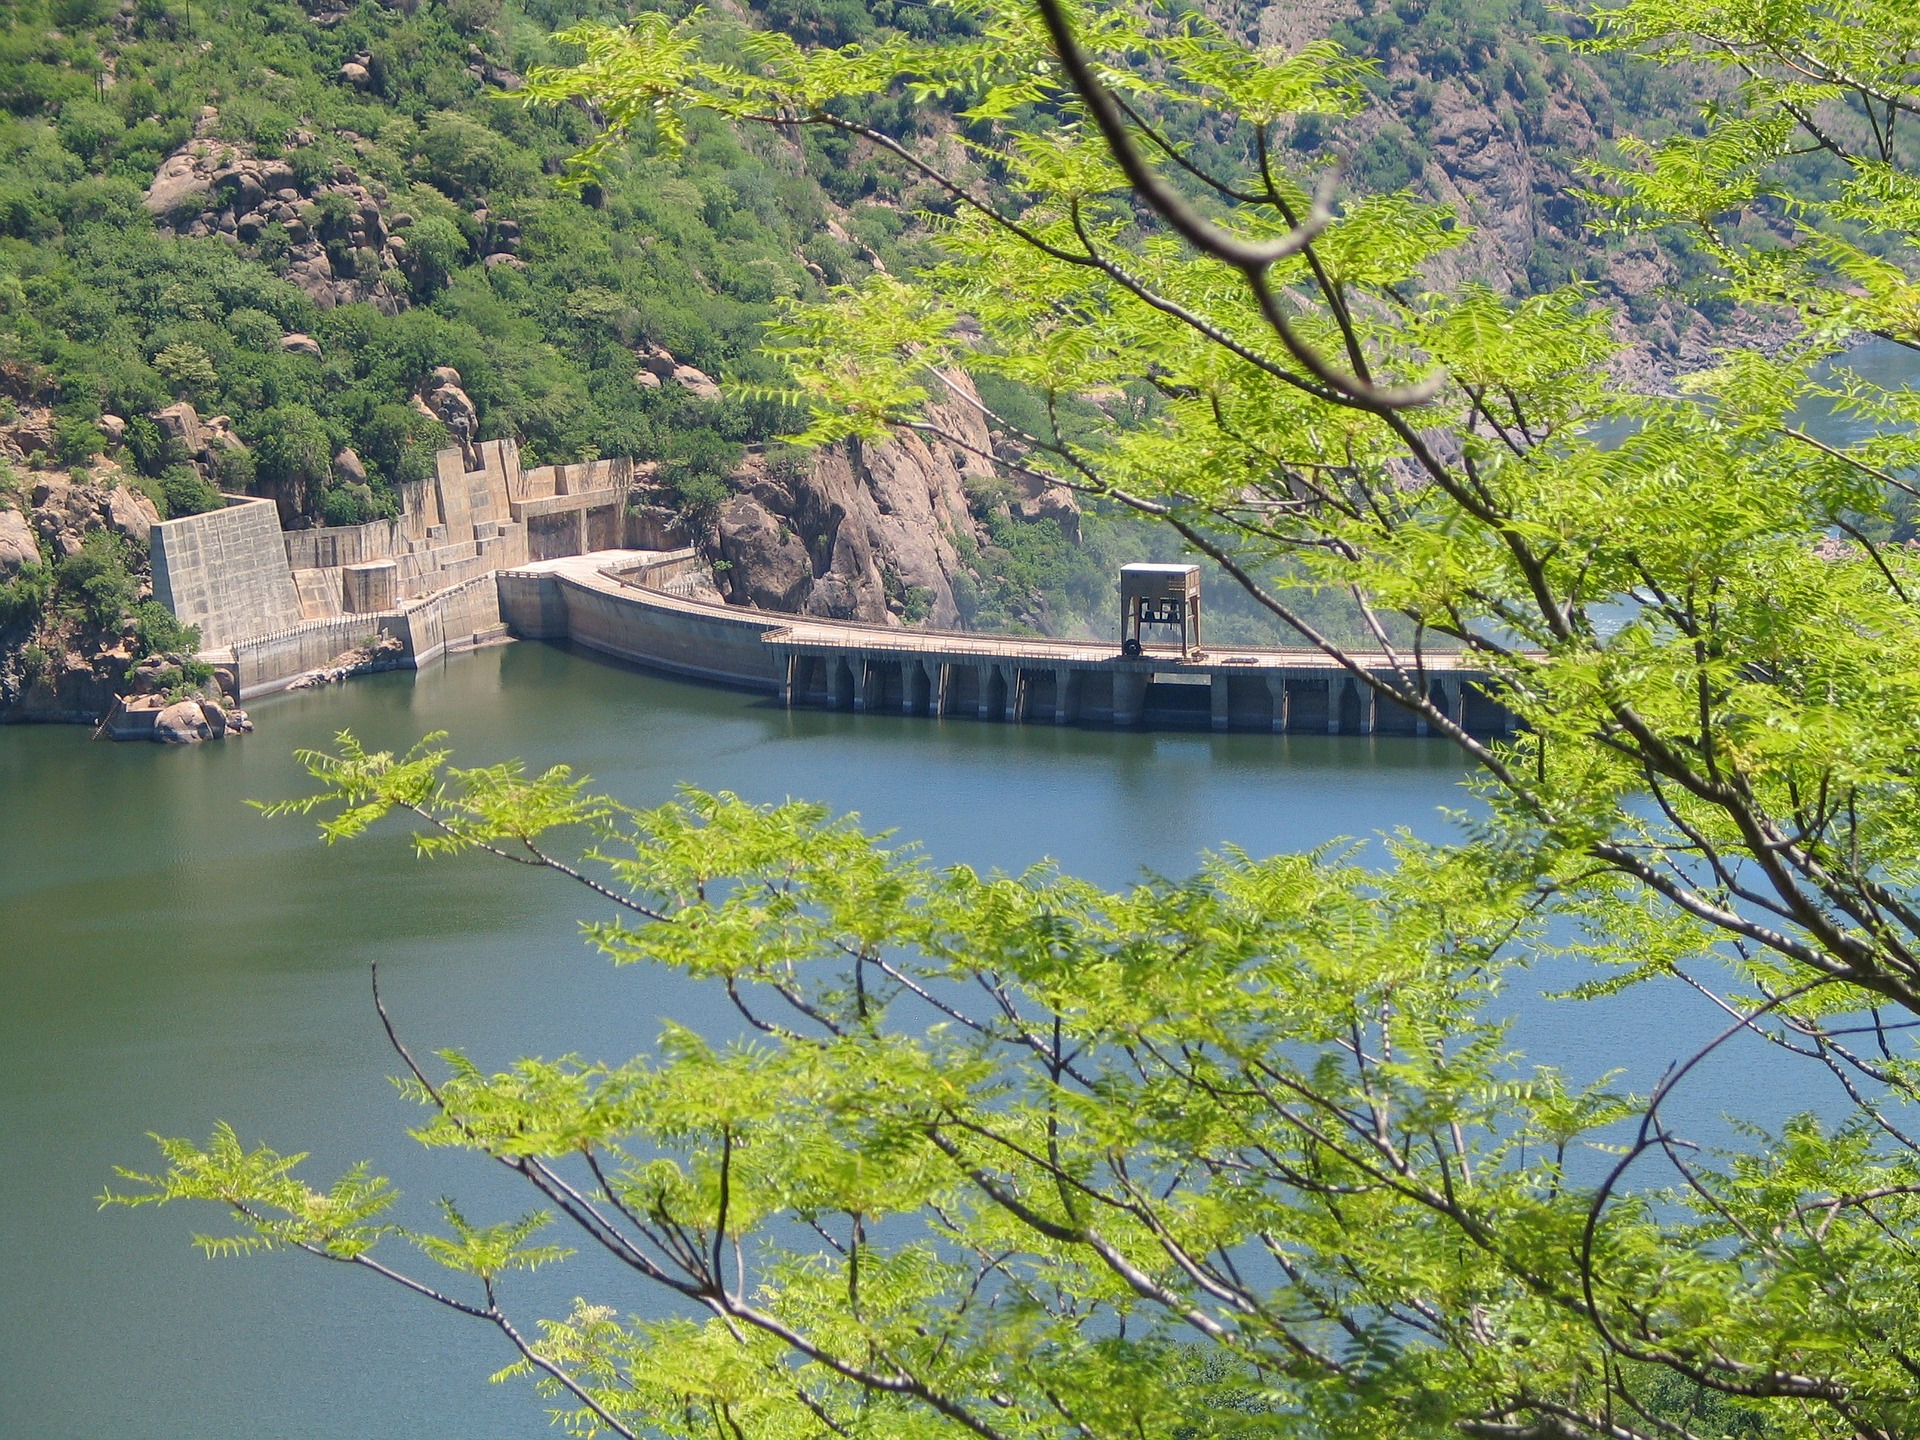 Dam for storing water and hydro power use.